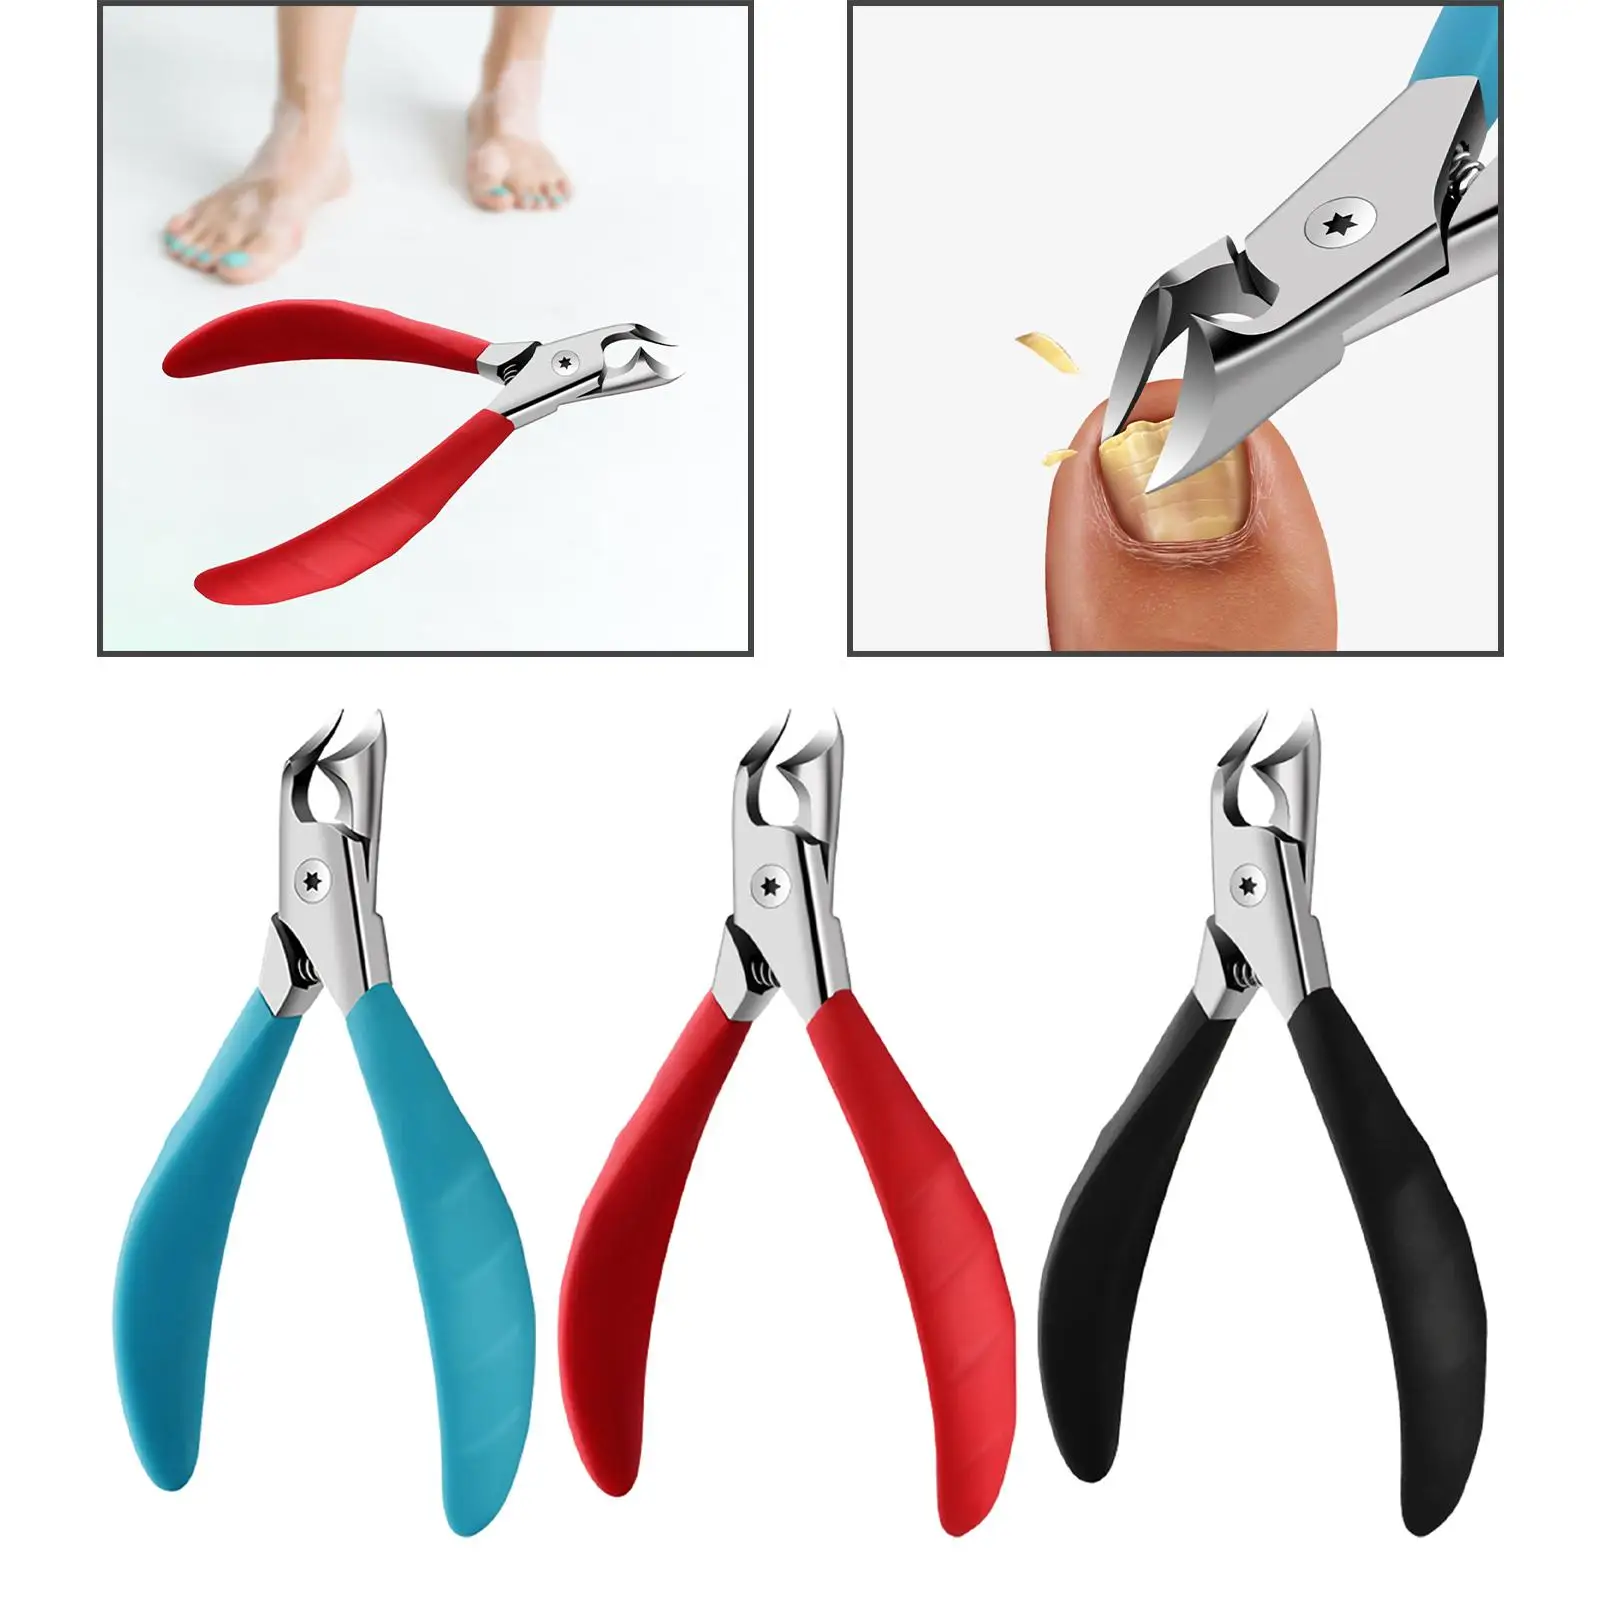 Stainless Steel Toenail Clippers Heavy Duty 7mm Wide Jaw for Salon Home